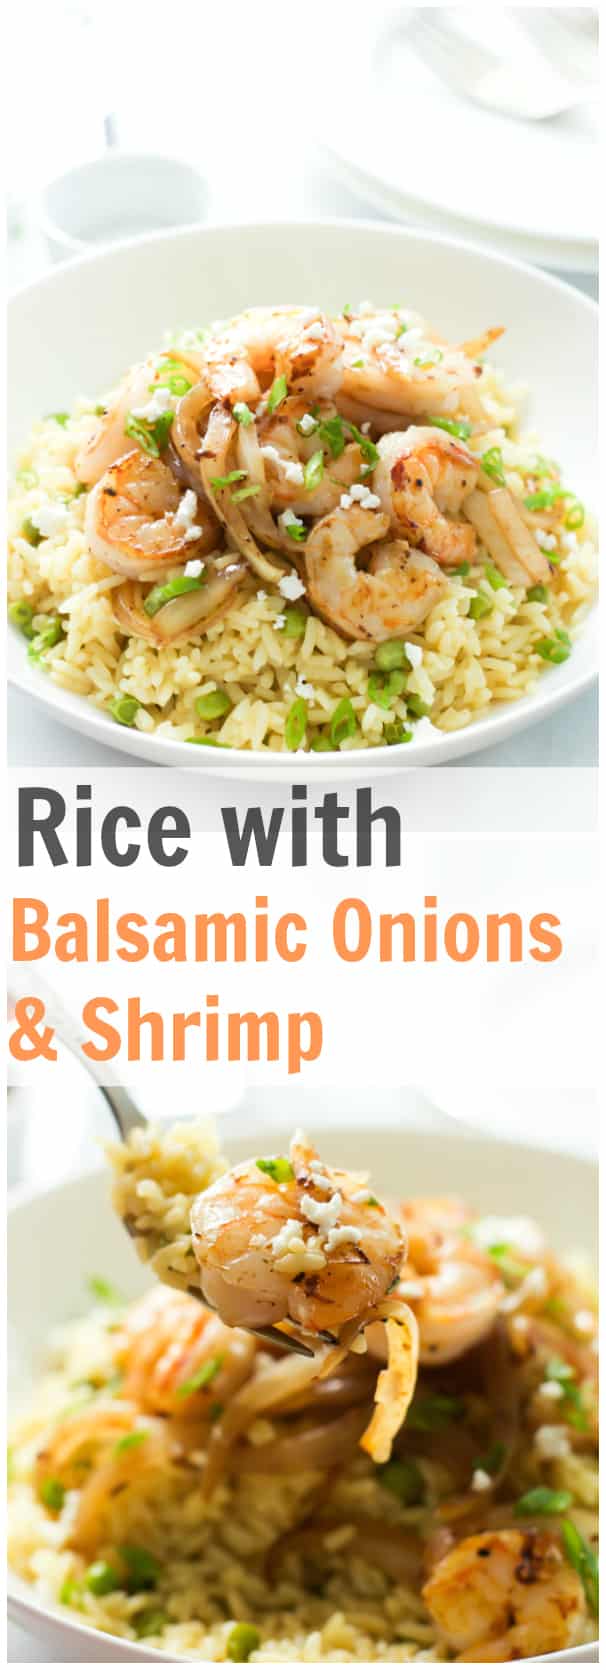 Rice with Balsamic Onions & Shrimp